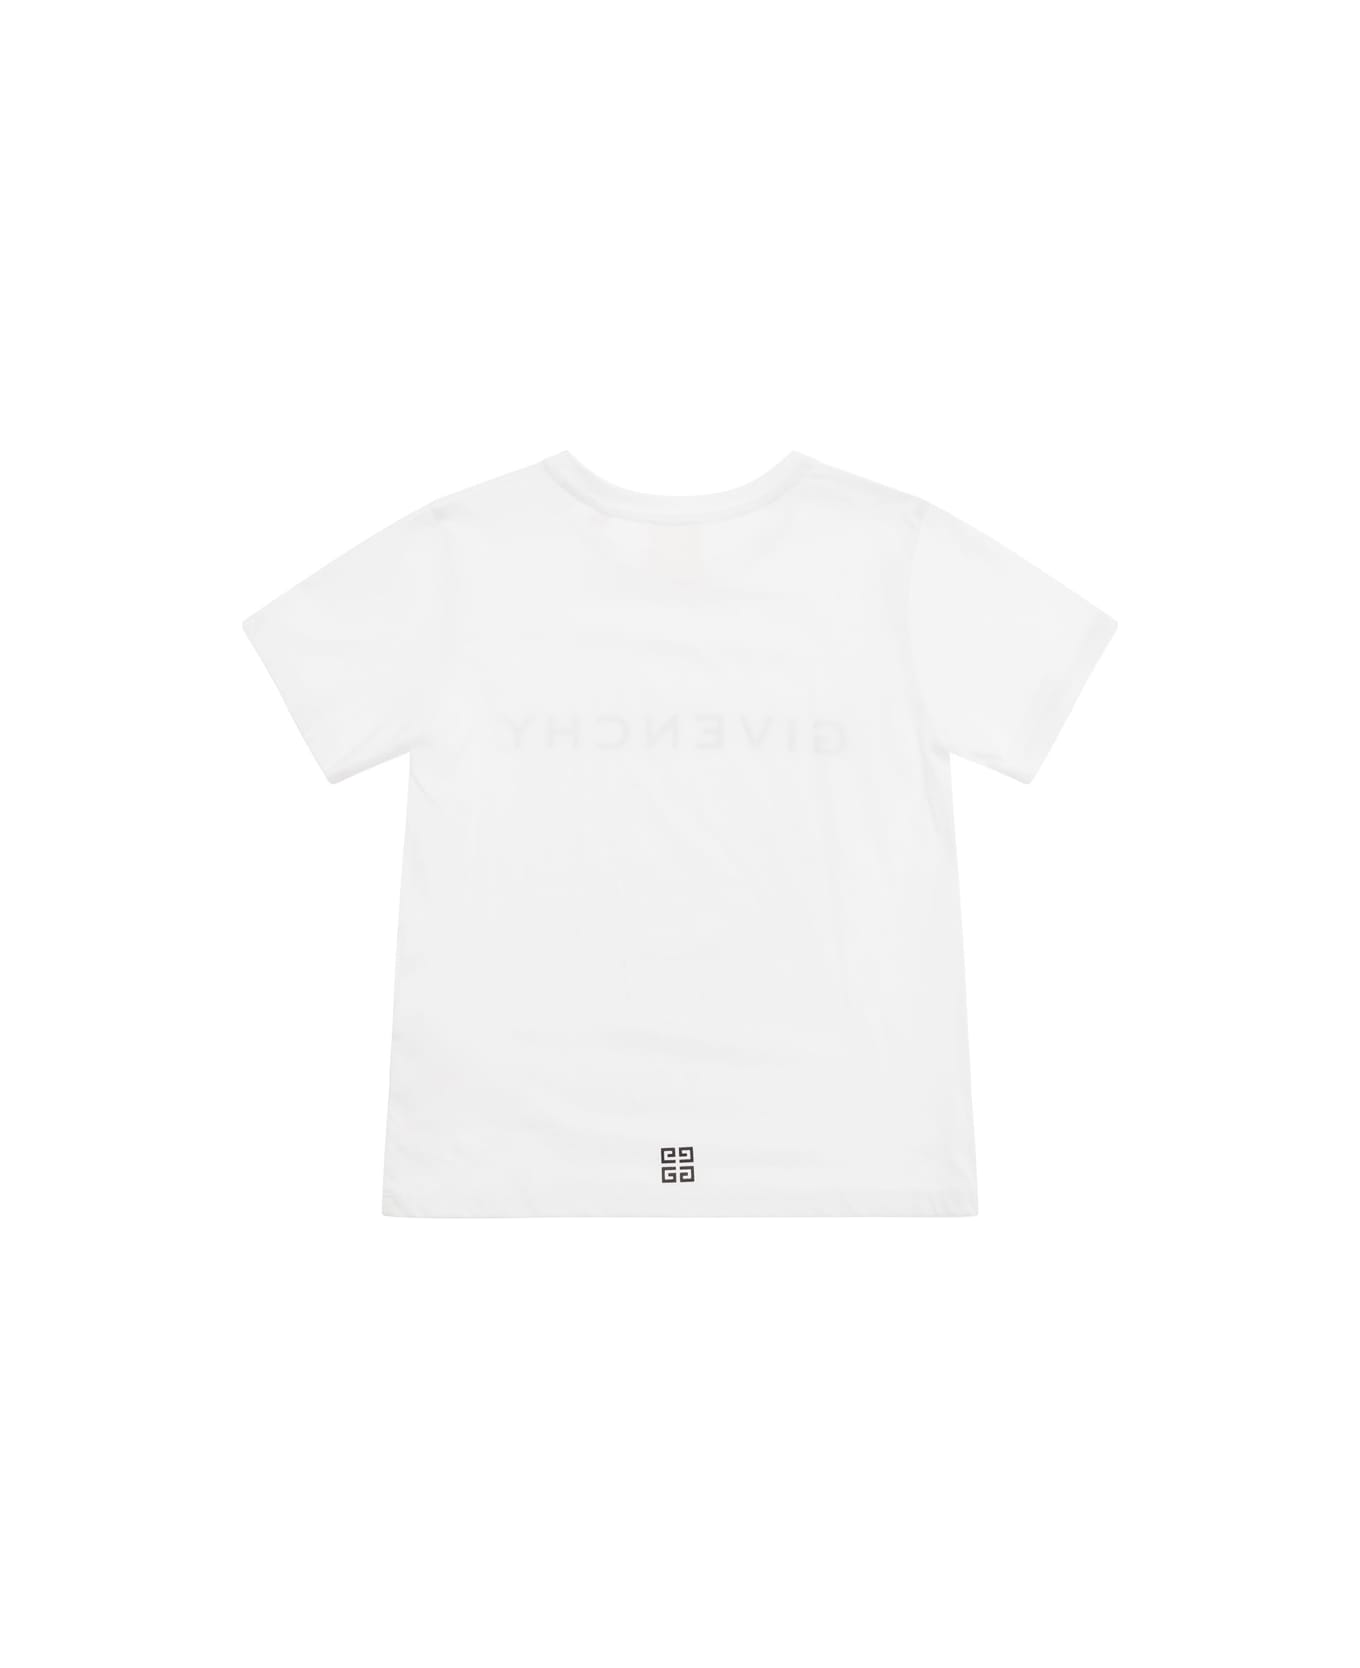 Givenchy White Crewneck T-shirt With Logo Lettering Print In Cotton Girl - White